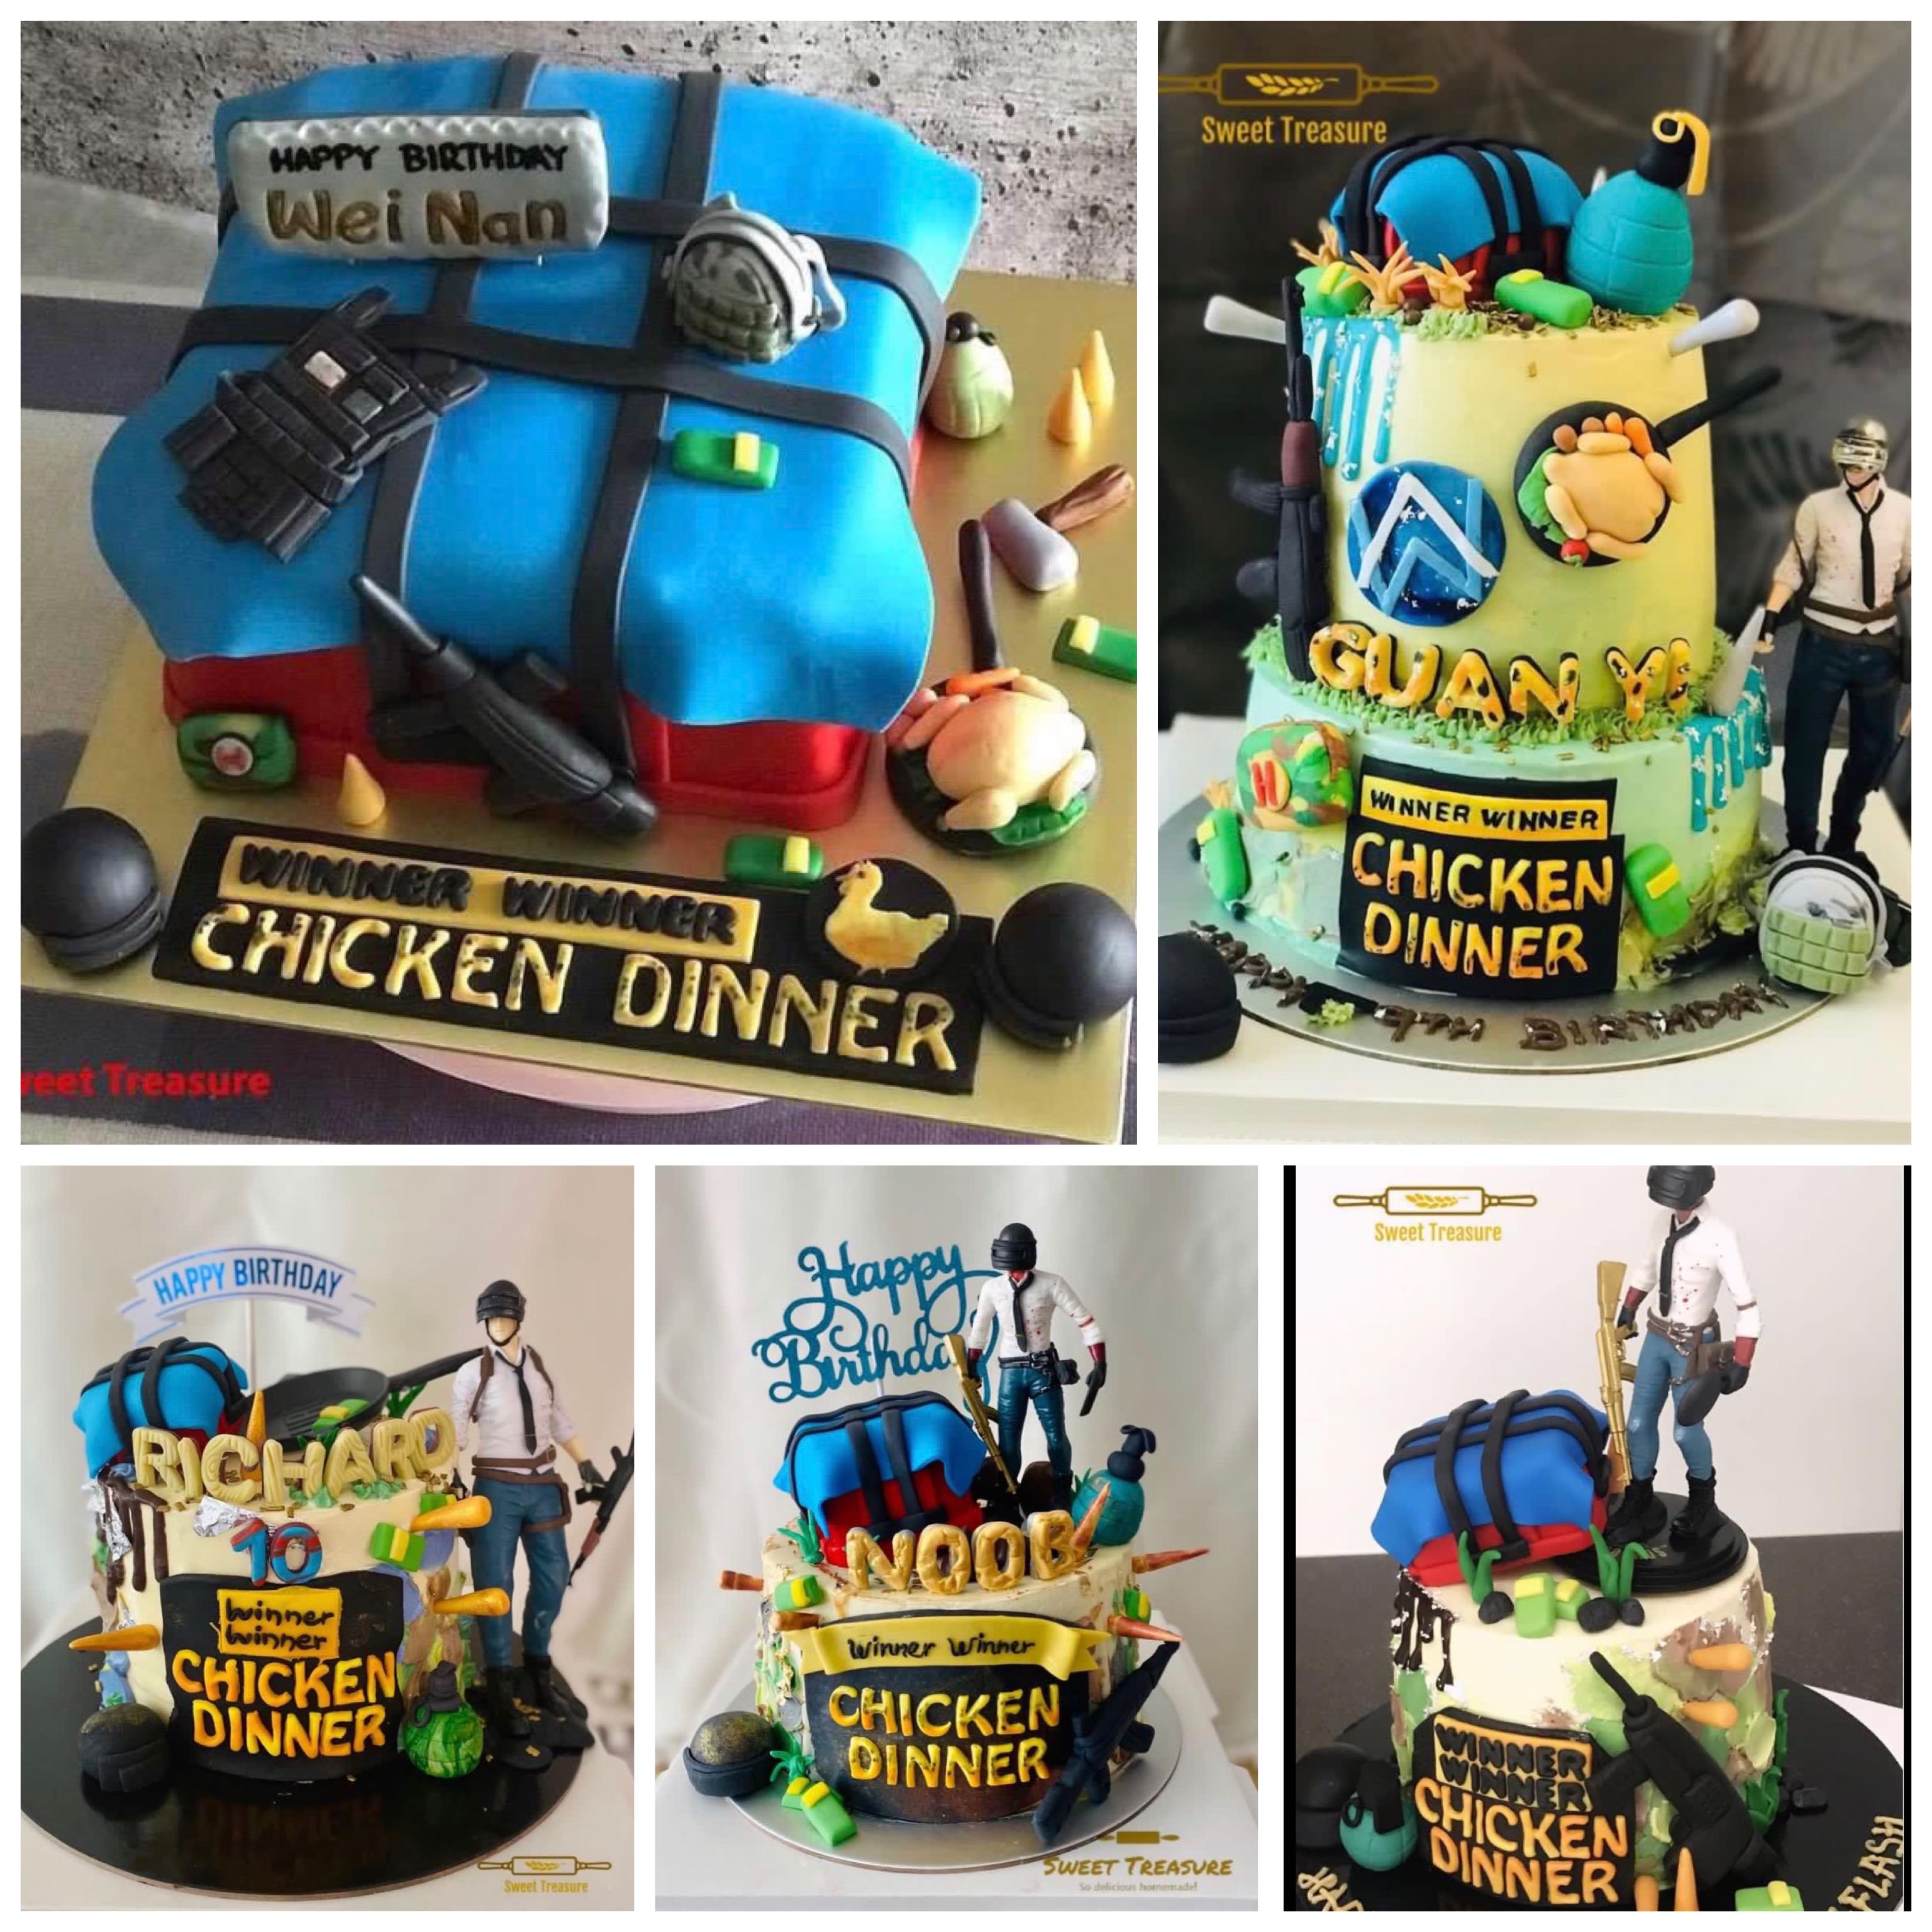 Share more than 91 pubg cakes for boys super hot - in.daotaonec